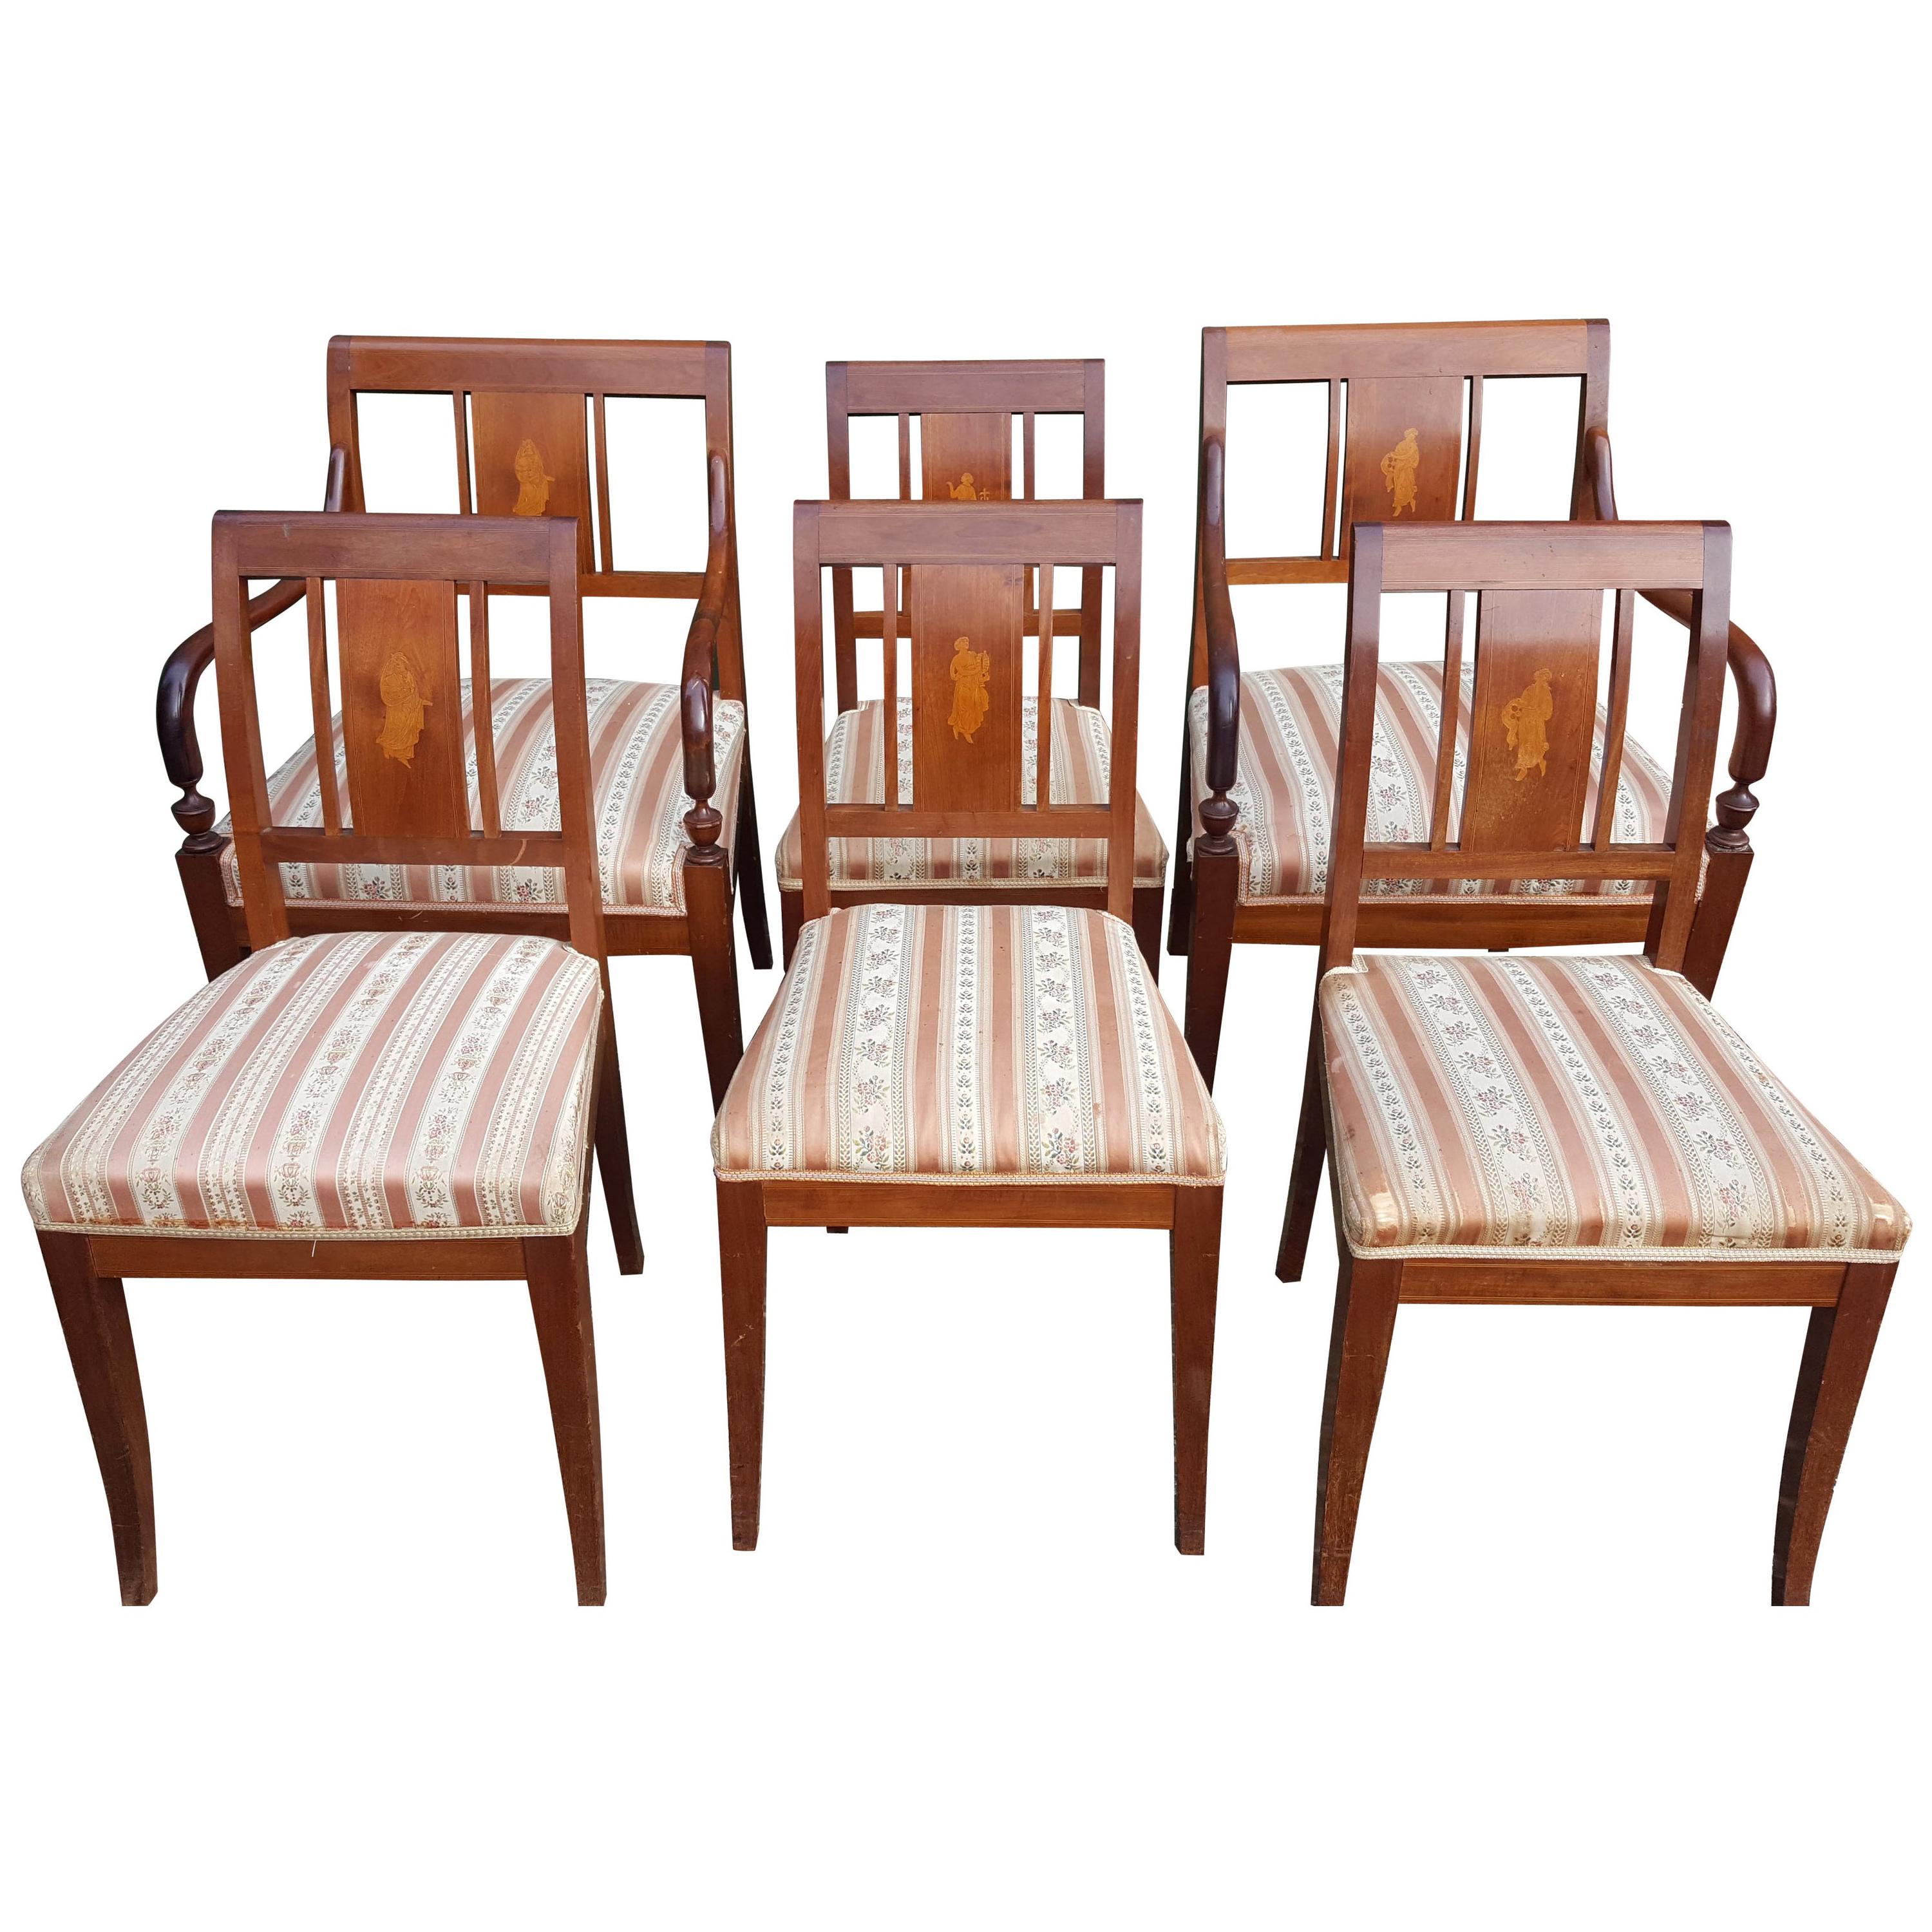 Art Deco Swedish Dining Chairs Set of 6 Marquetry Dark Honey, Early 20th Century For Sale